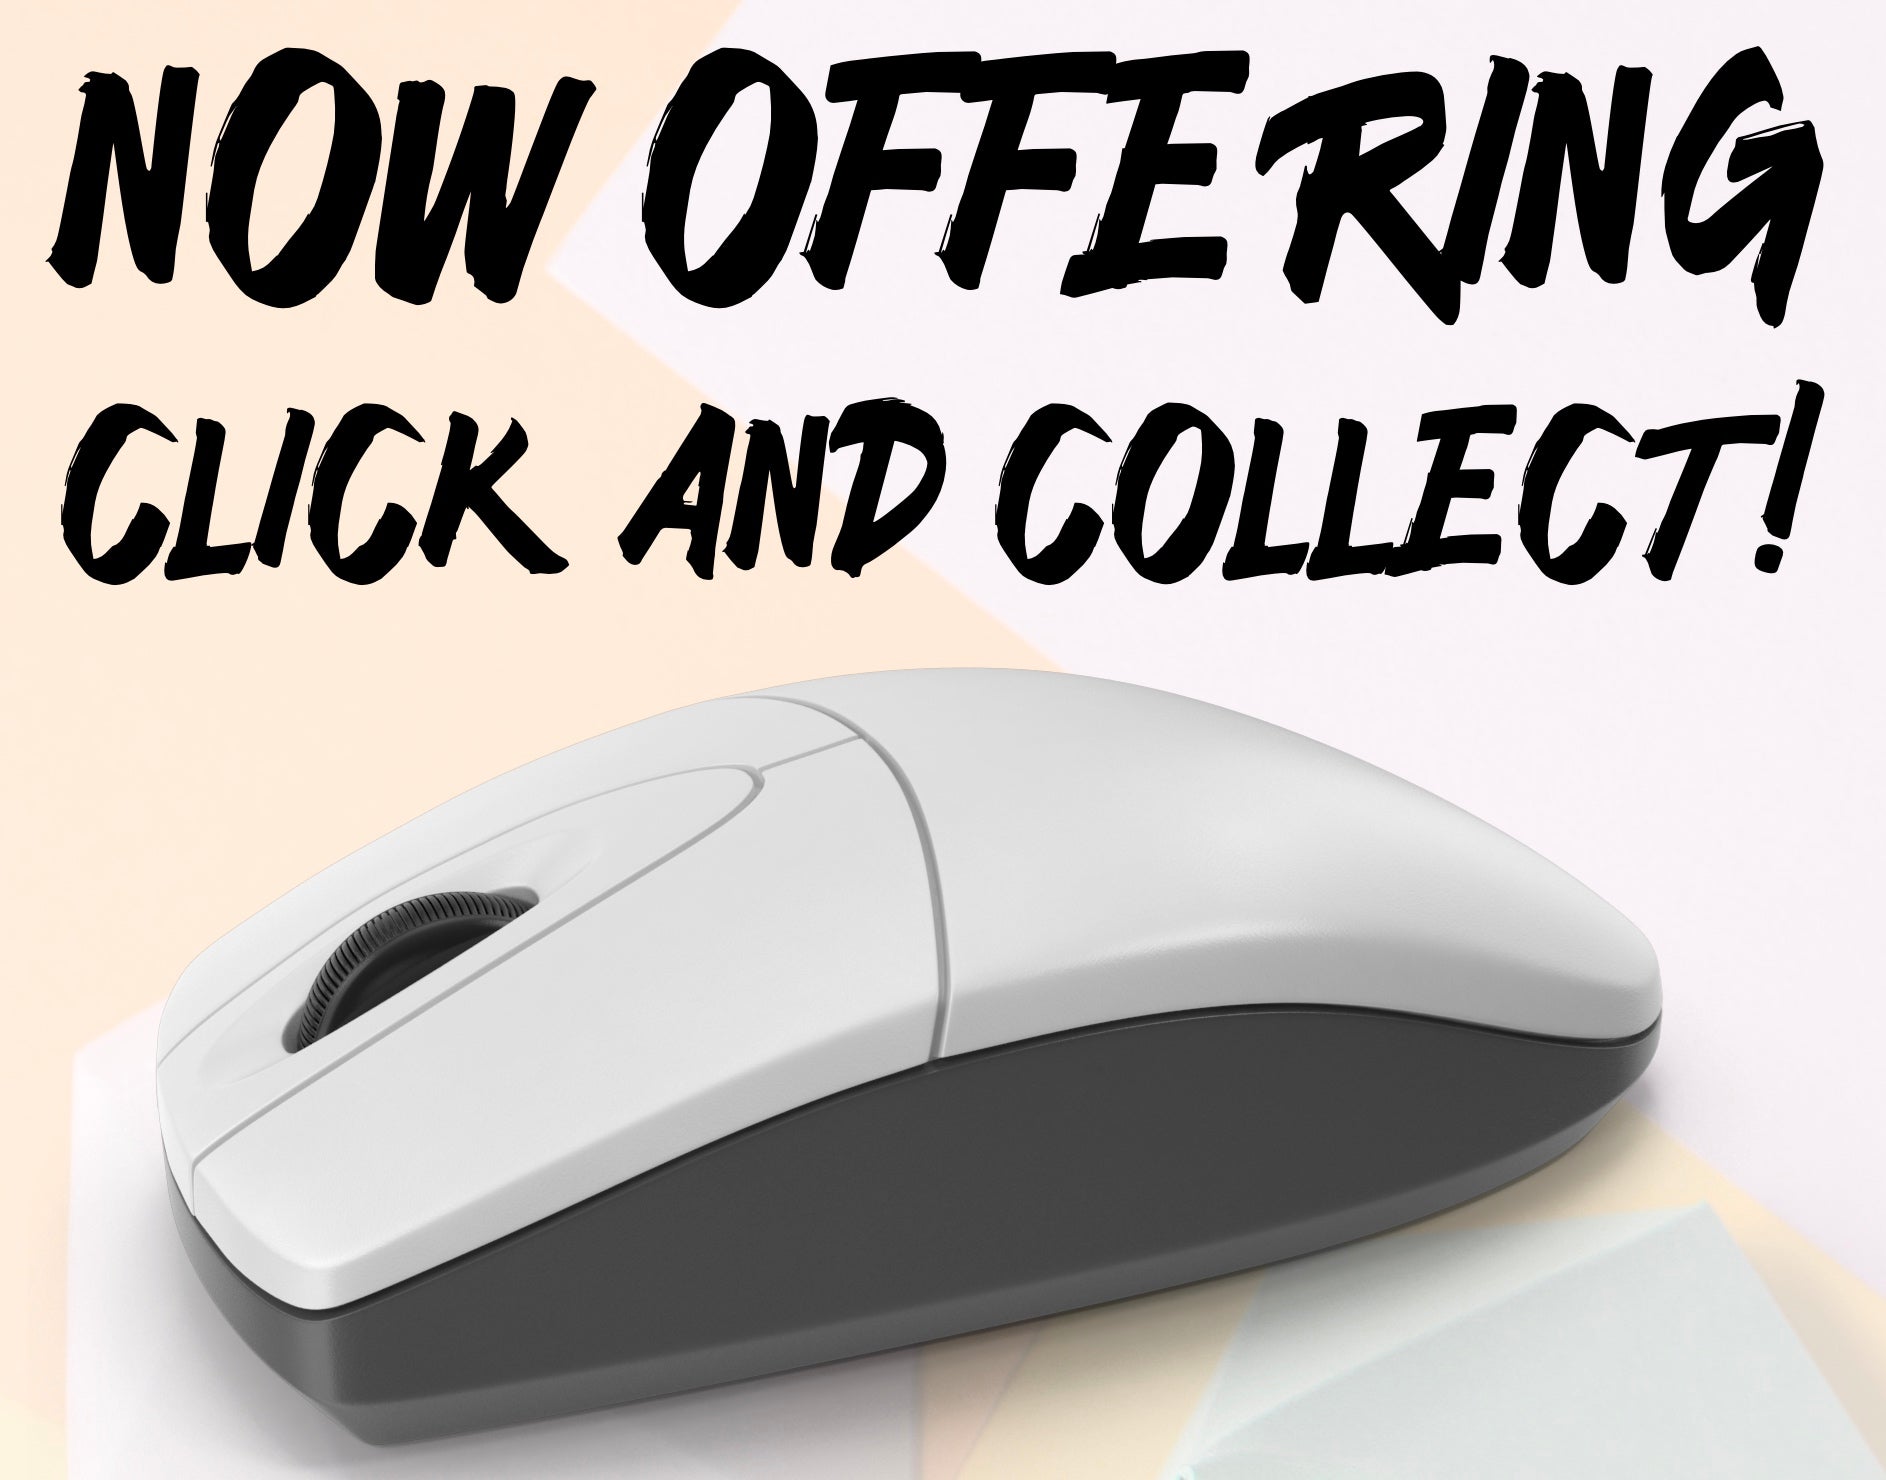 CLICK AND COLLECT IS NOW AVAILABLE